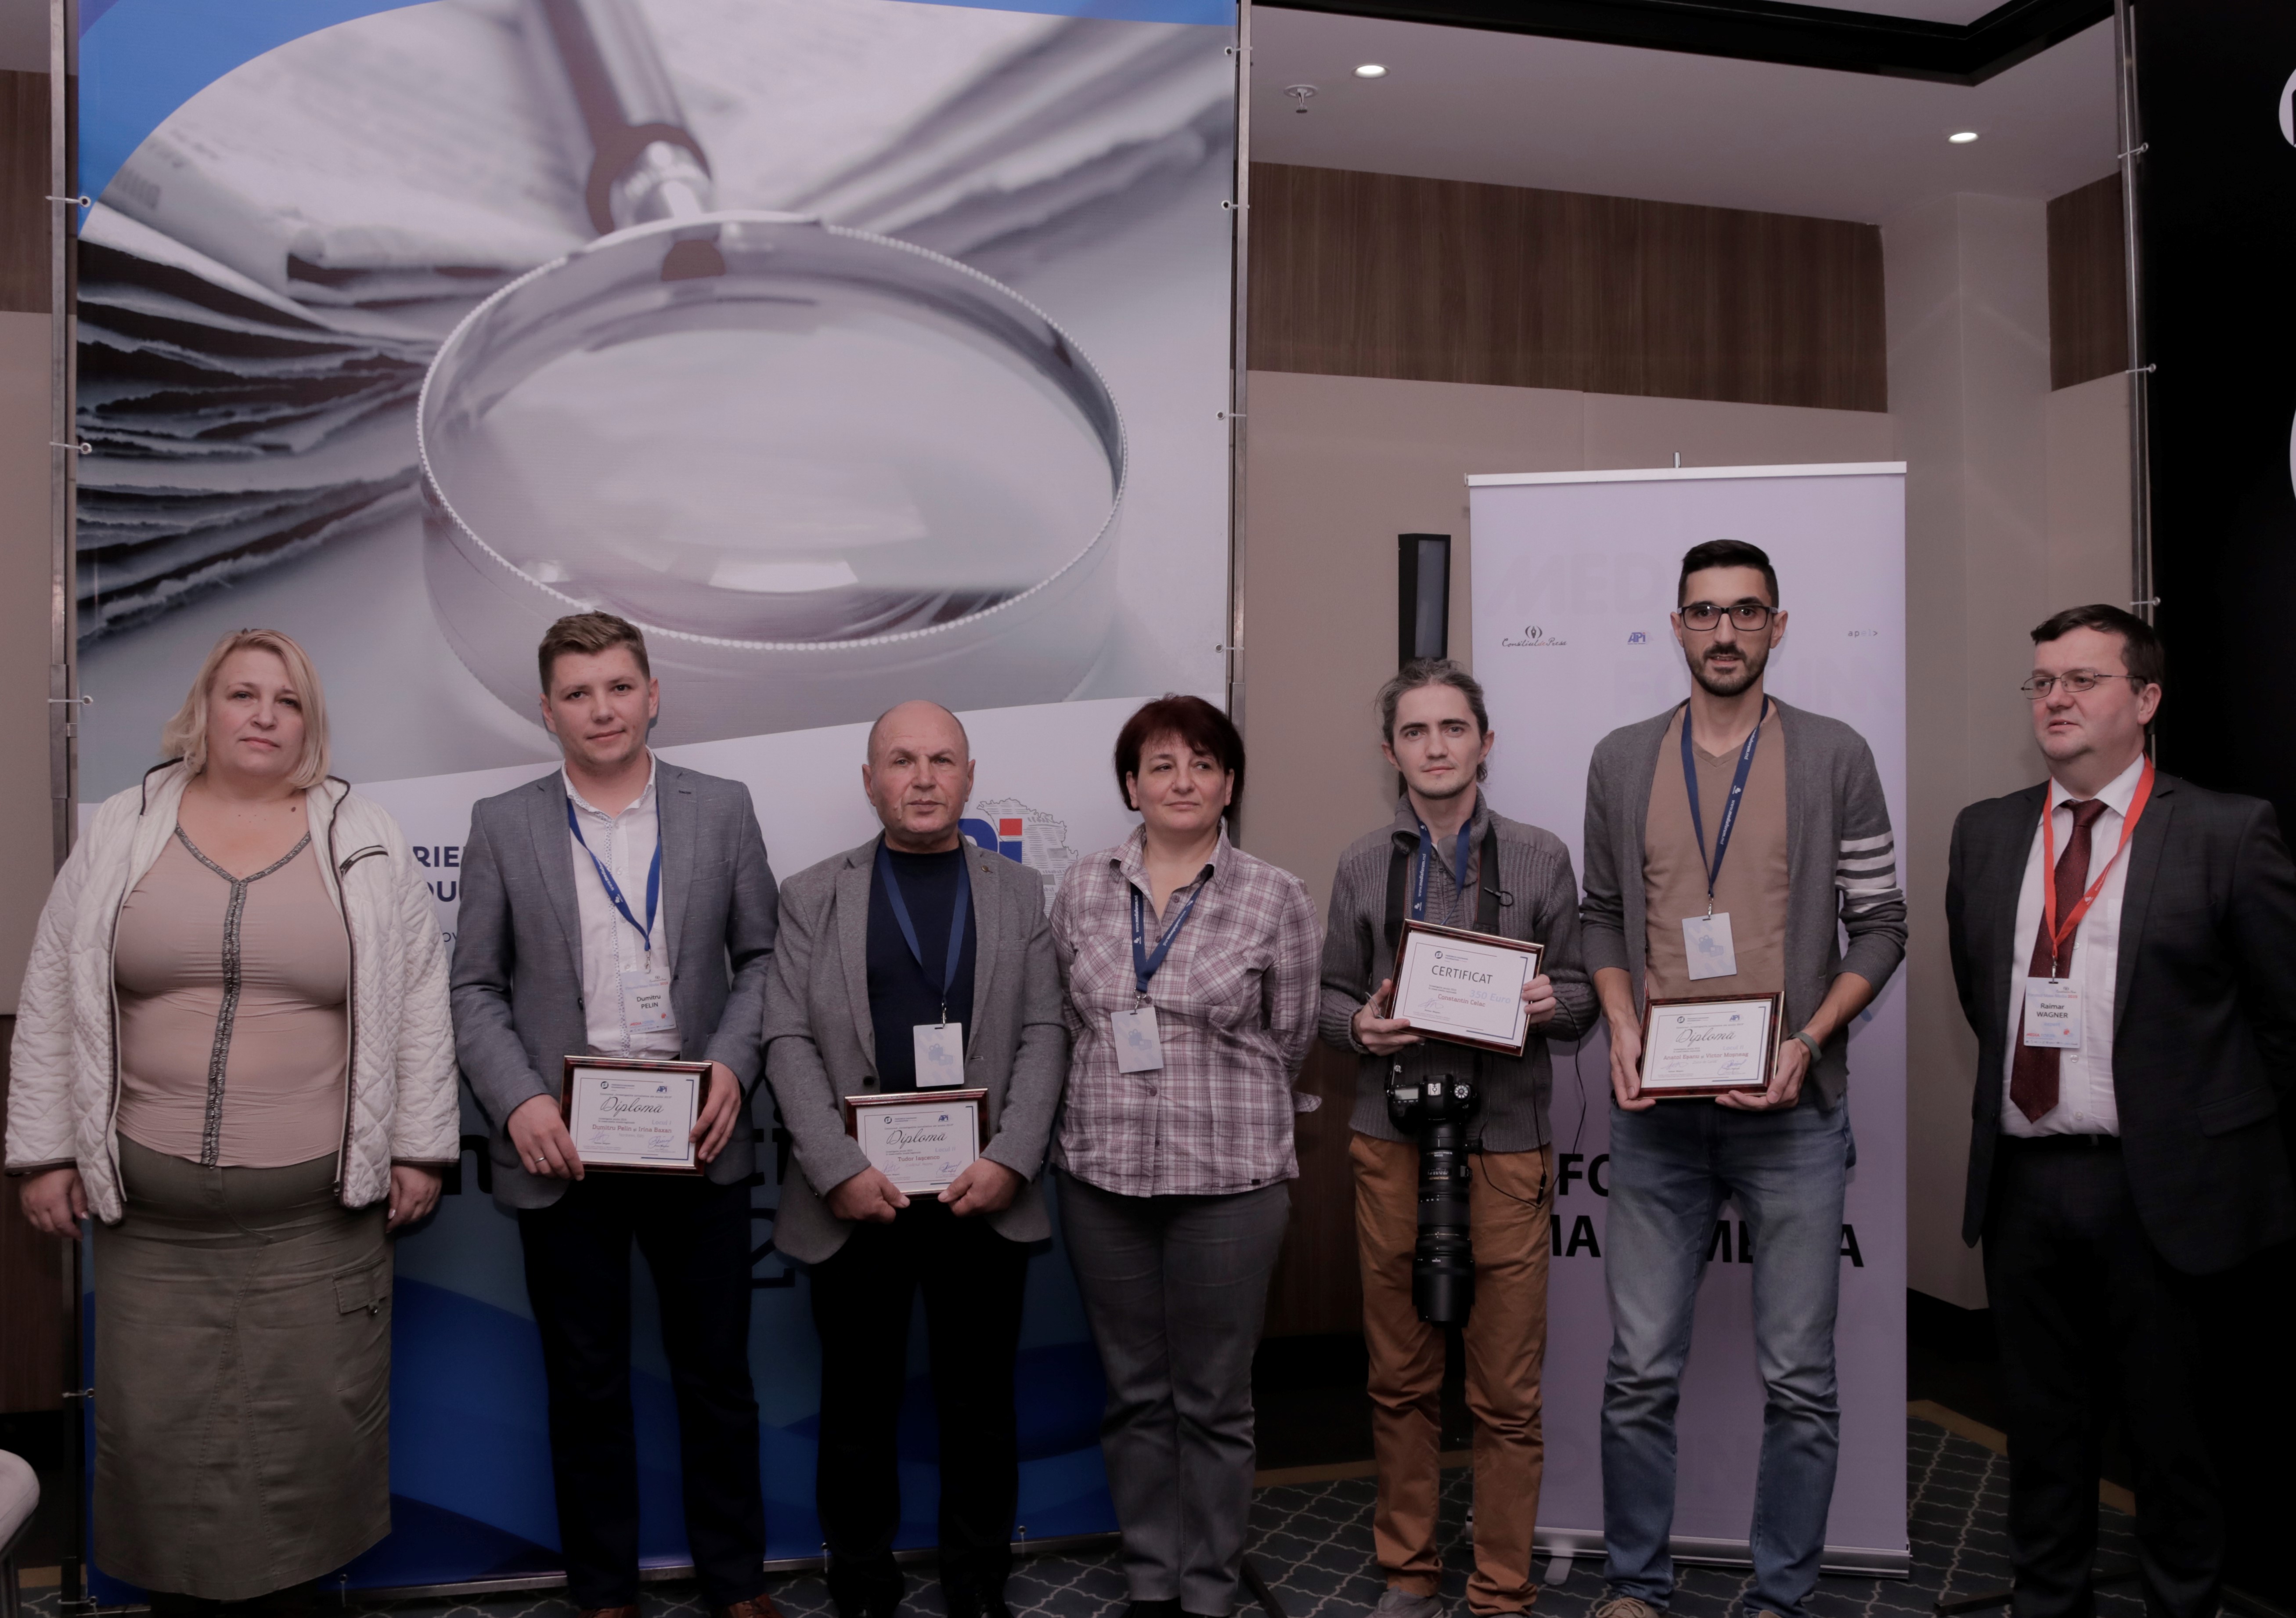 Graduates and Trainers of the CSAJ, winners of the National Competition “Journalistic Investigations of the year 2019”